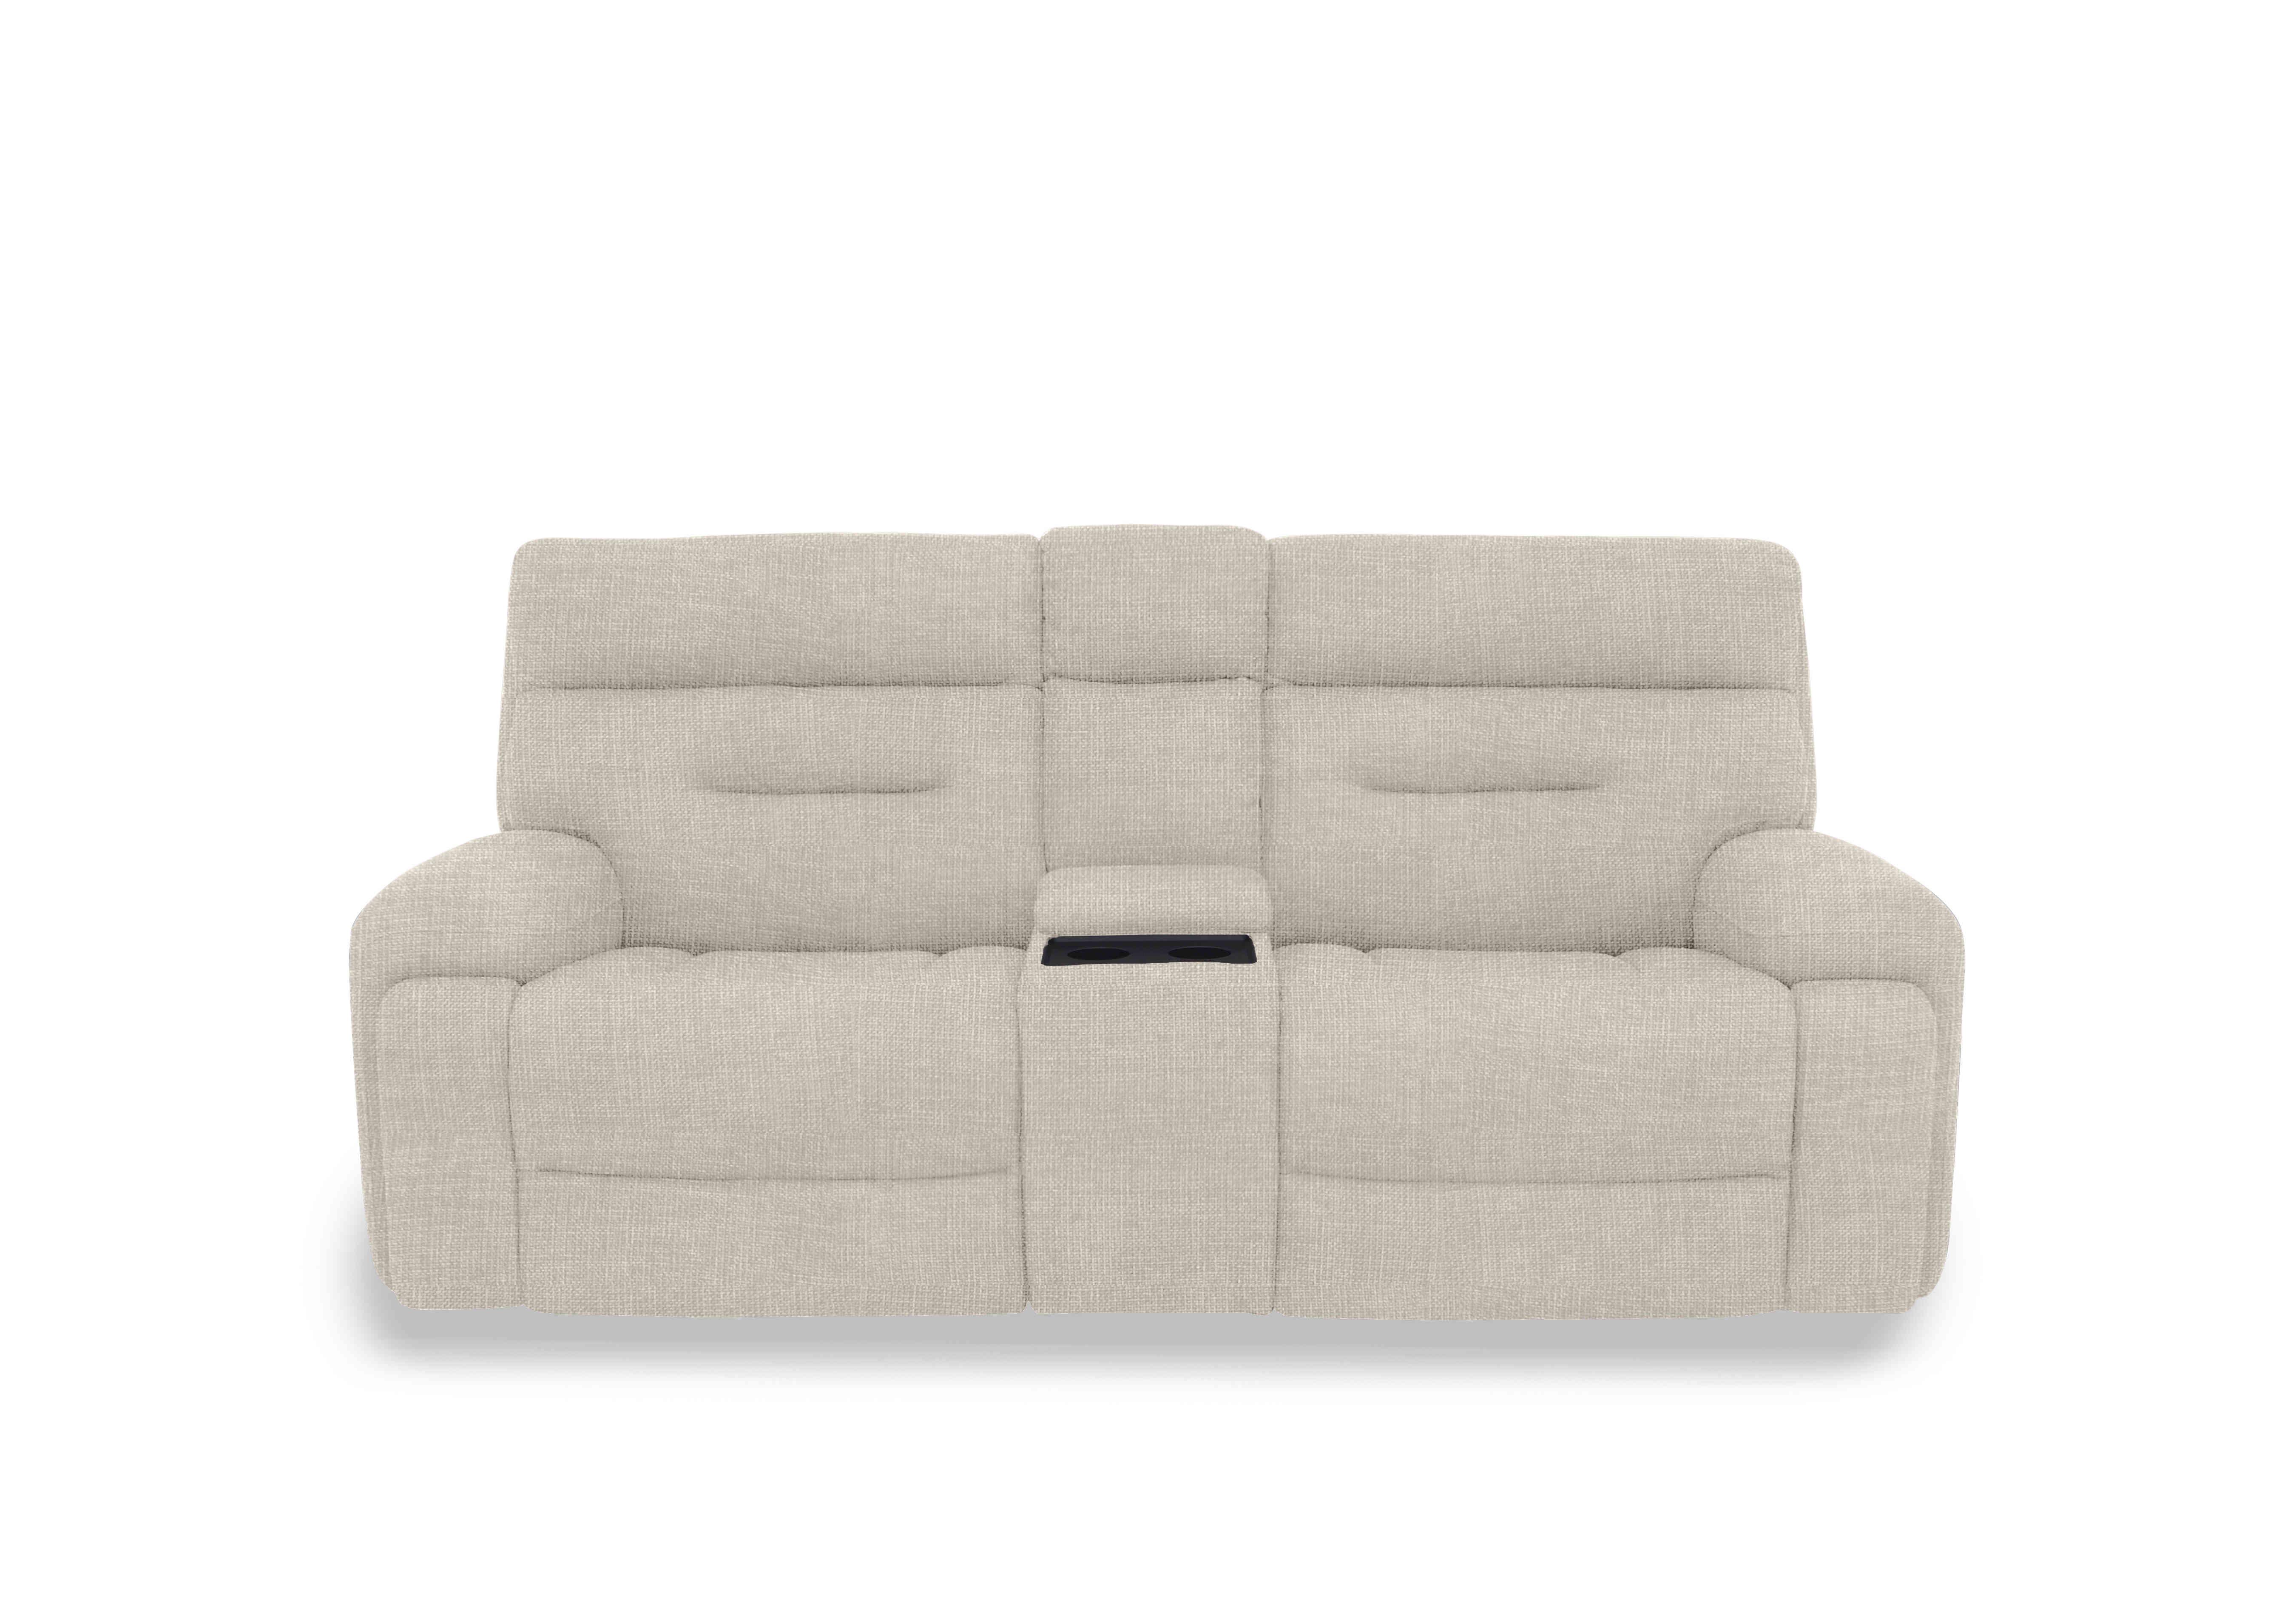 Cinemax Media 3 Seater Fabric Power Recliner Sofa with Power Headrests in We-0102  Weave Stone on Furniture Village